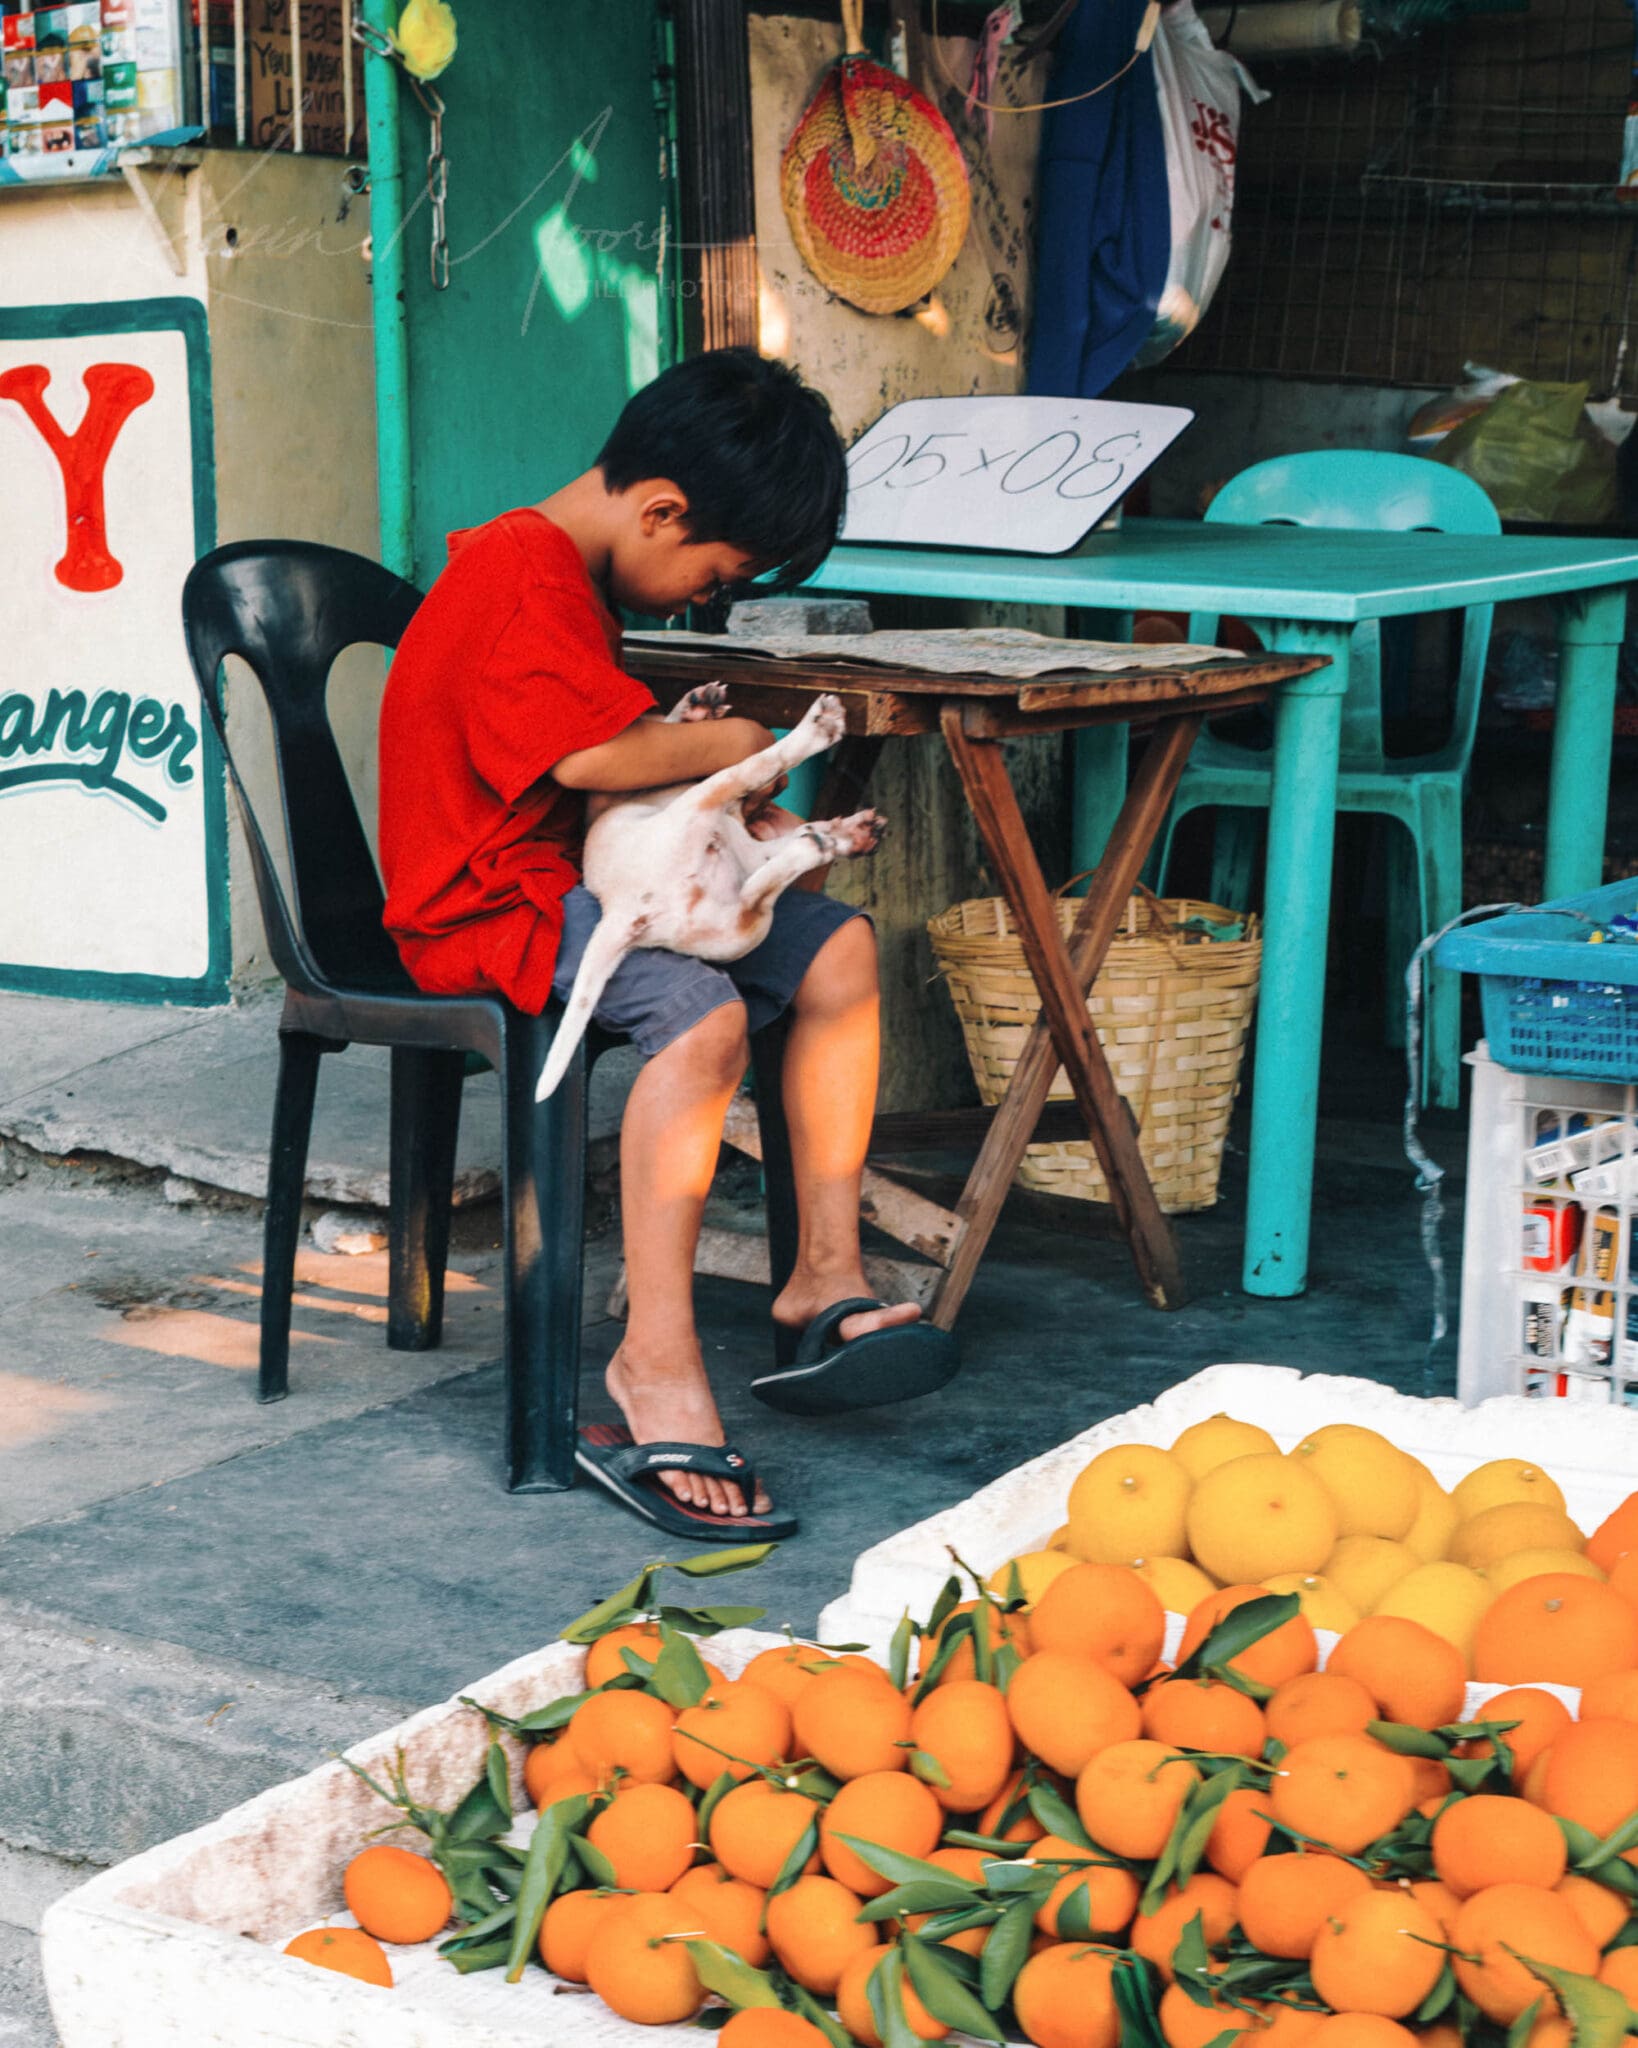 Boy engrossed in playing with puppy at vibrant street market in urban Philippines.